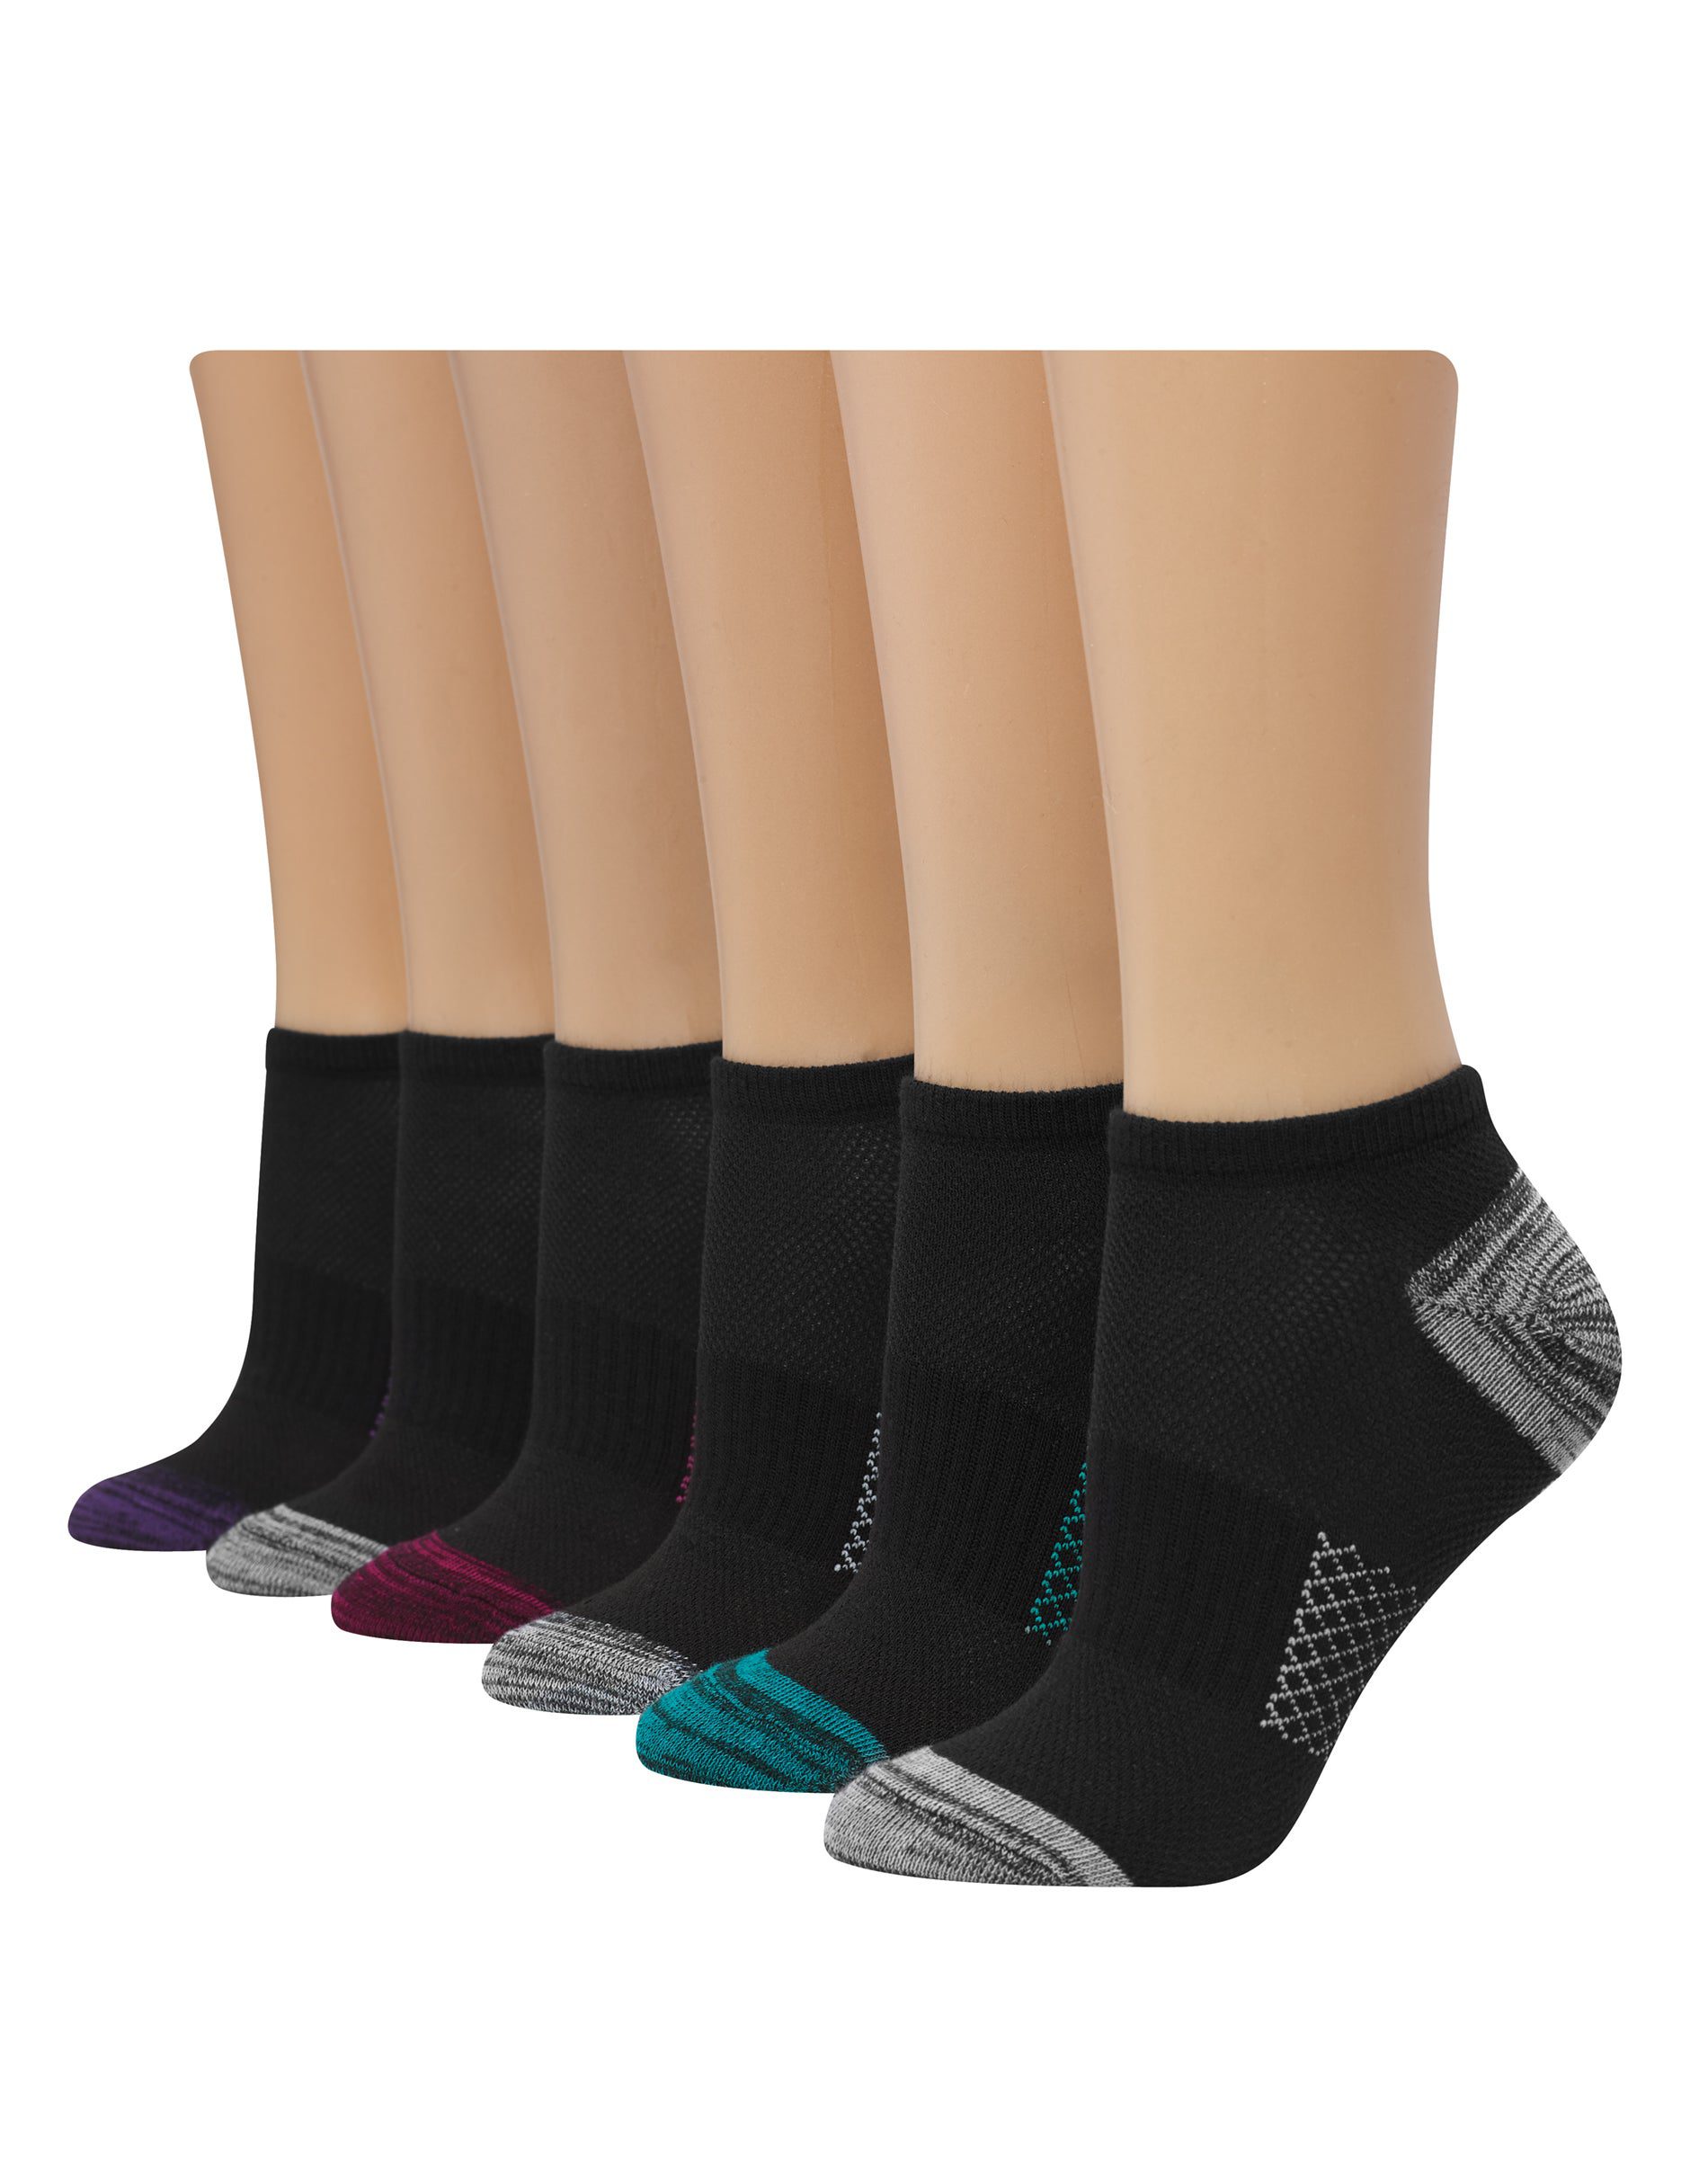 Hanes Womens Breathable Lightweight Super No Show Socks 6-Pack - Apparel  Direct Distributor